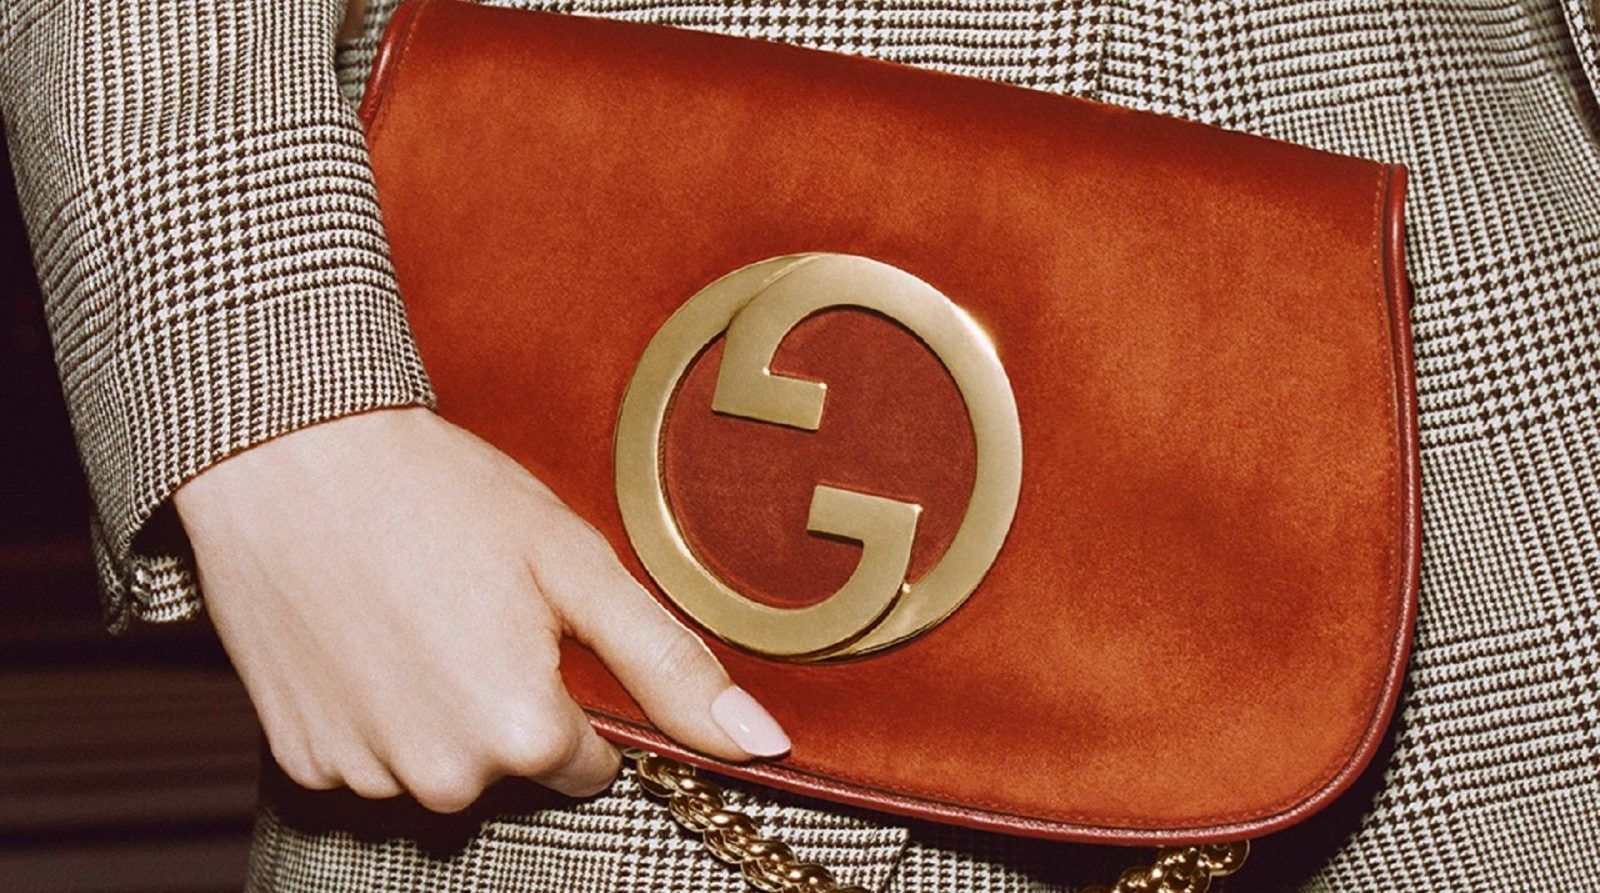 Gucci ends Balenciaga’s reign, named world’s hottest brand in Q2 2022